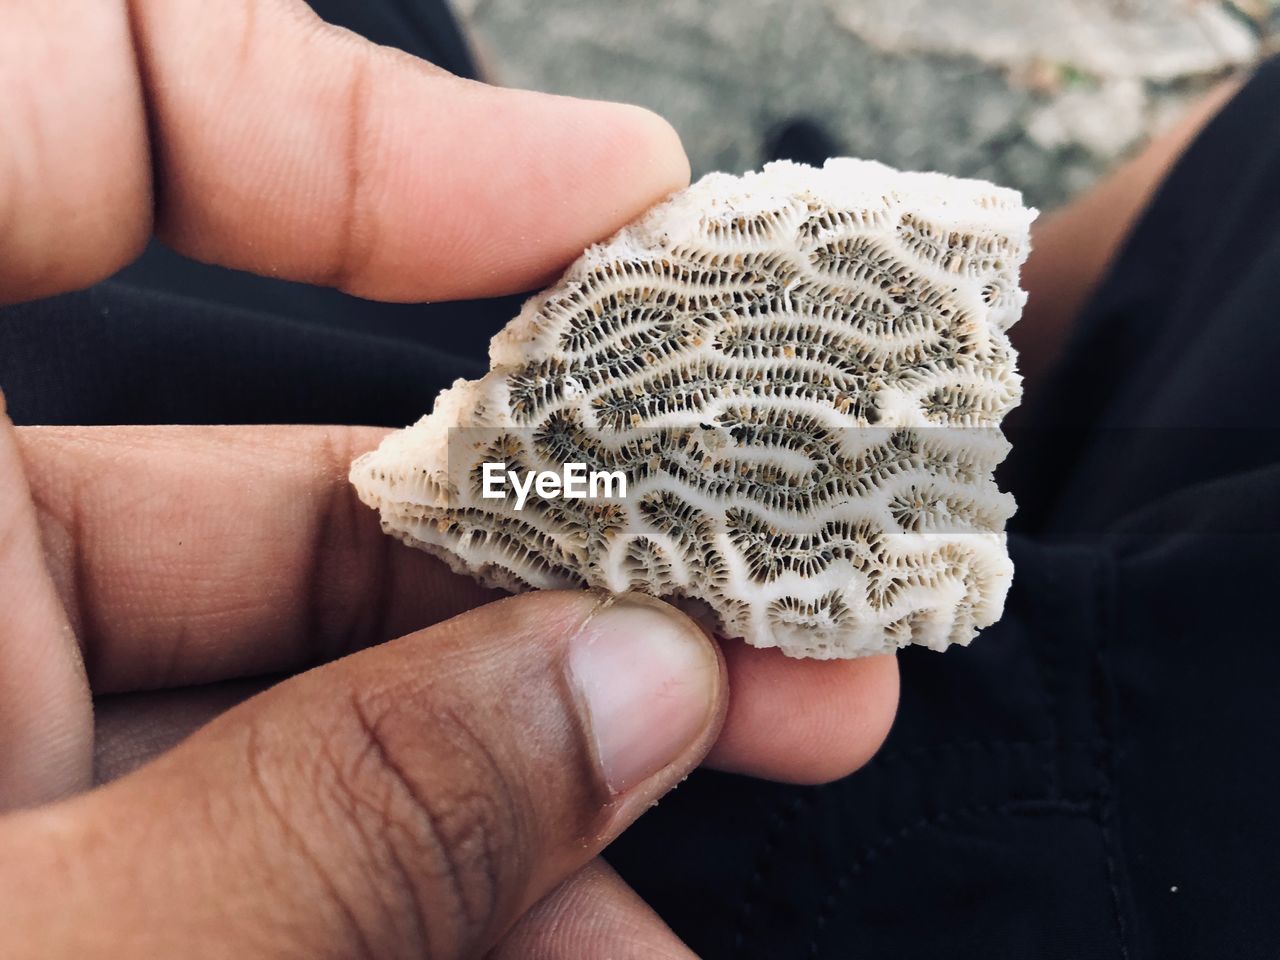 Midsection of person holding coral